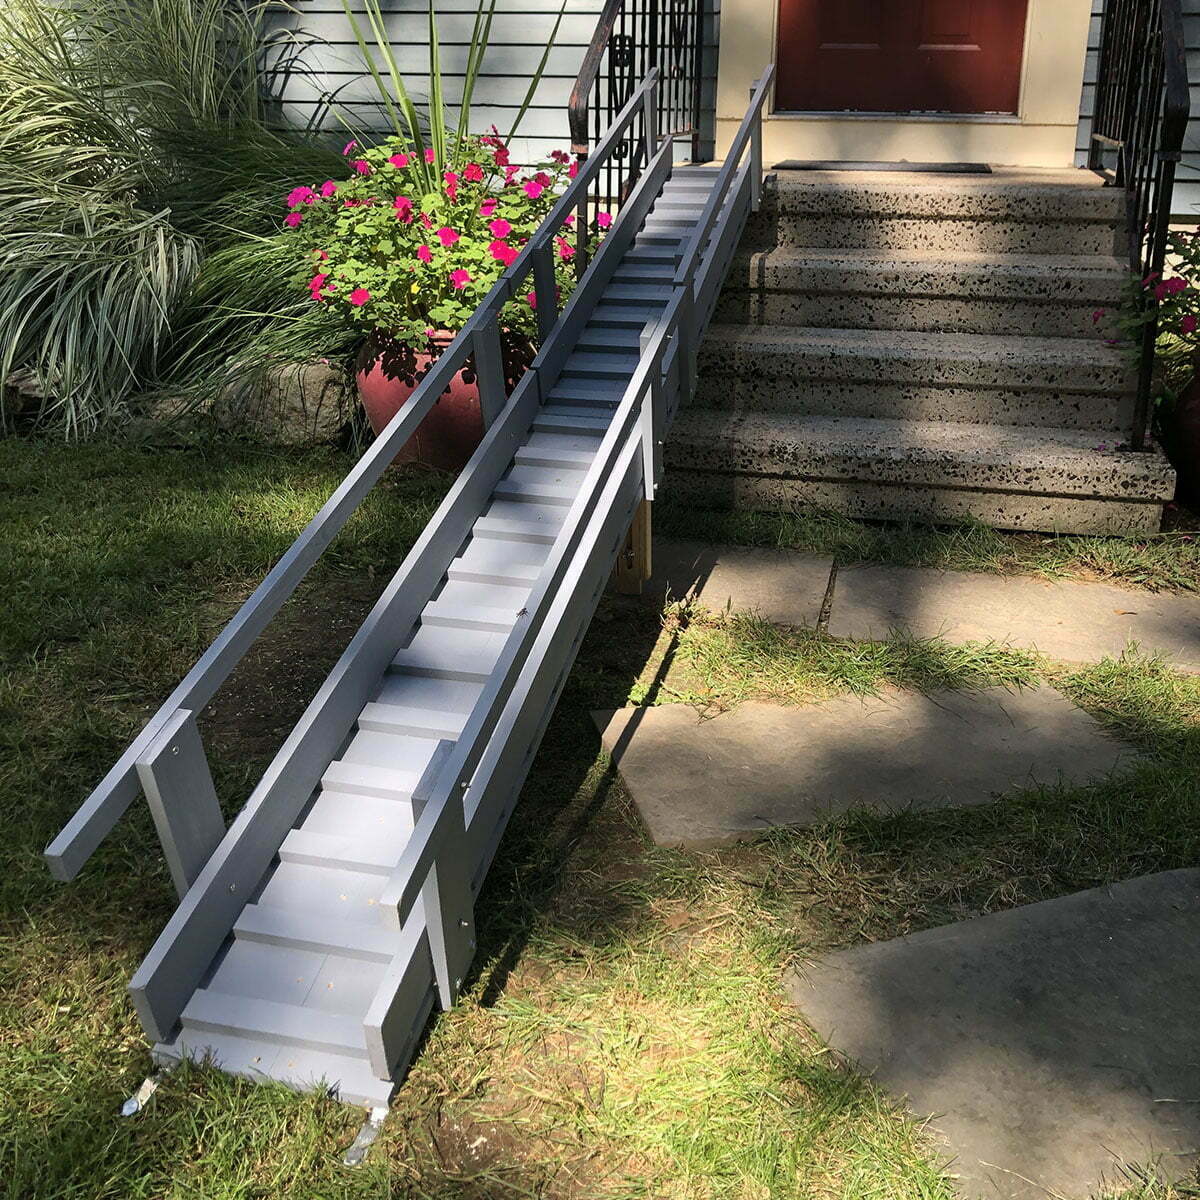 How To Build A Dog Ramp Over Stairs